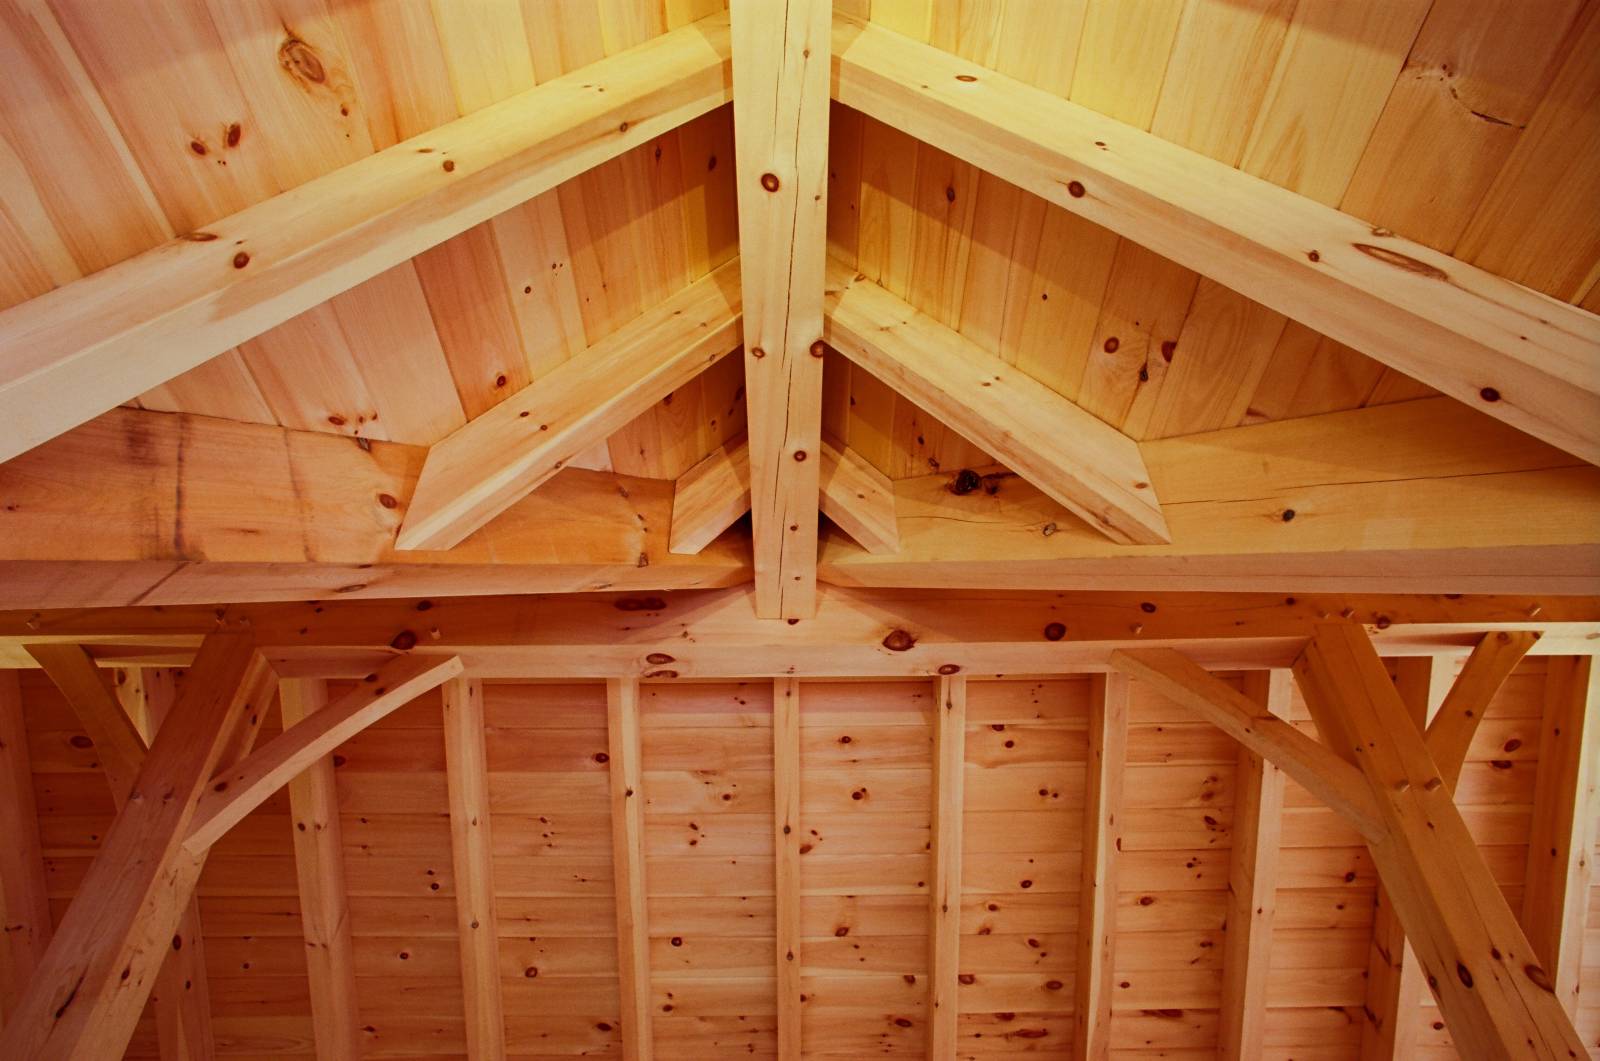 Heavy Timbers with Intricate Joinery Details